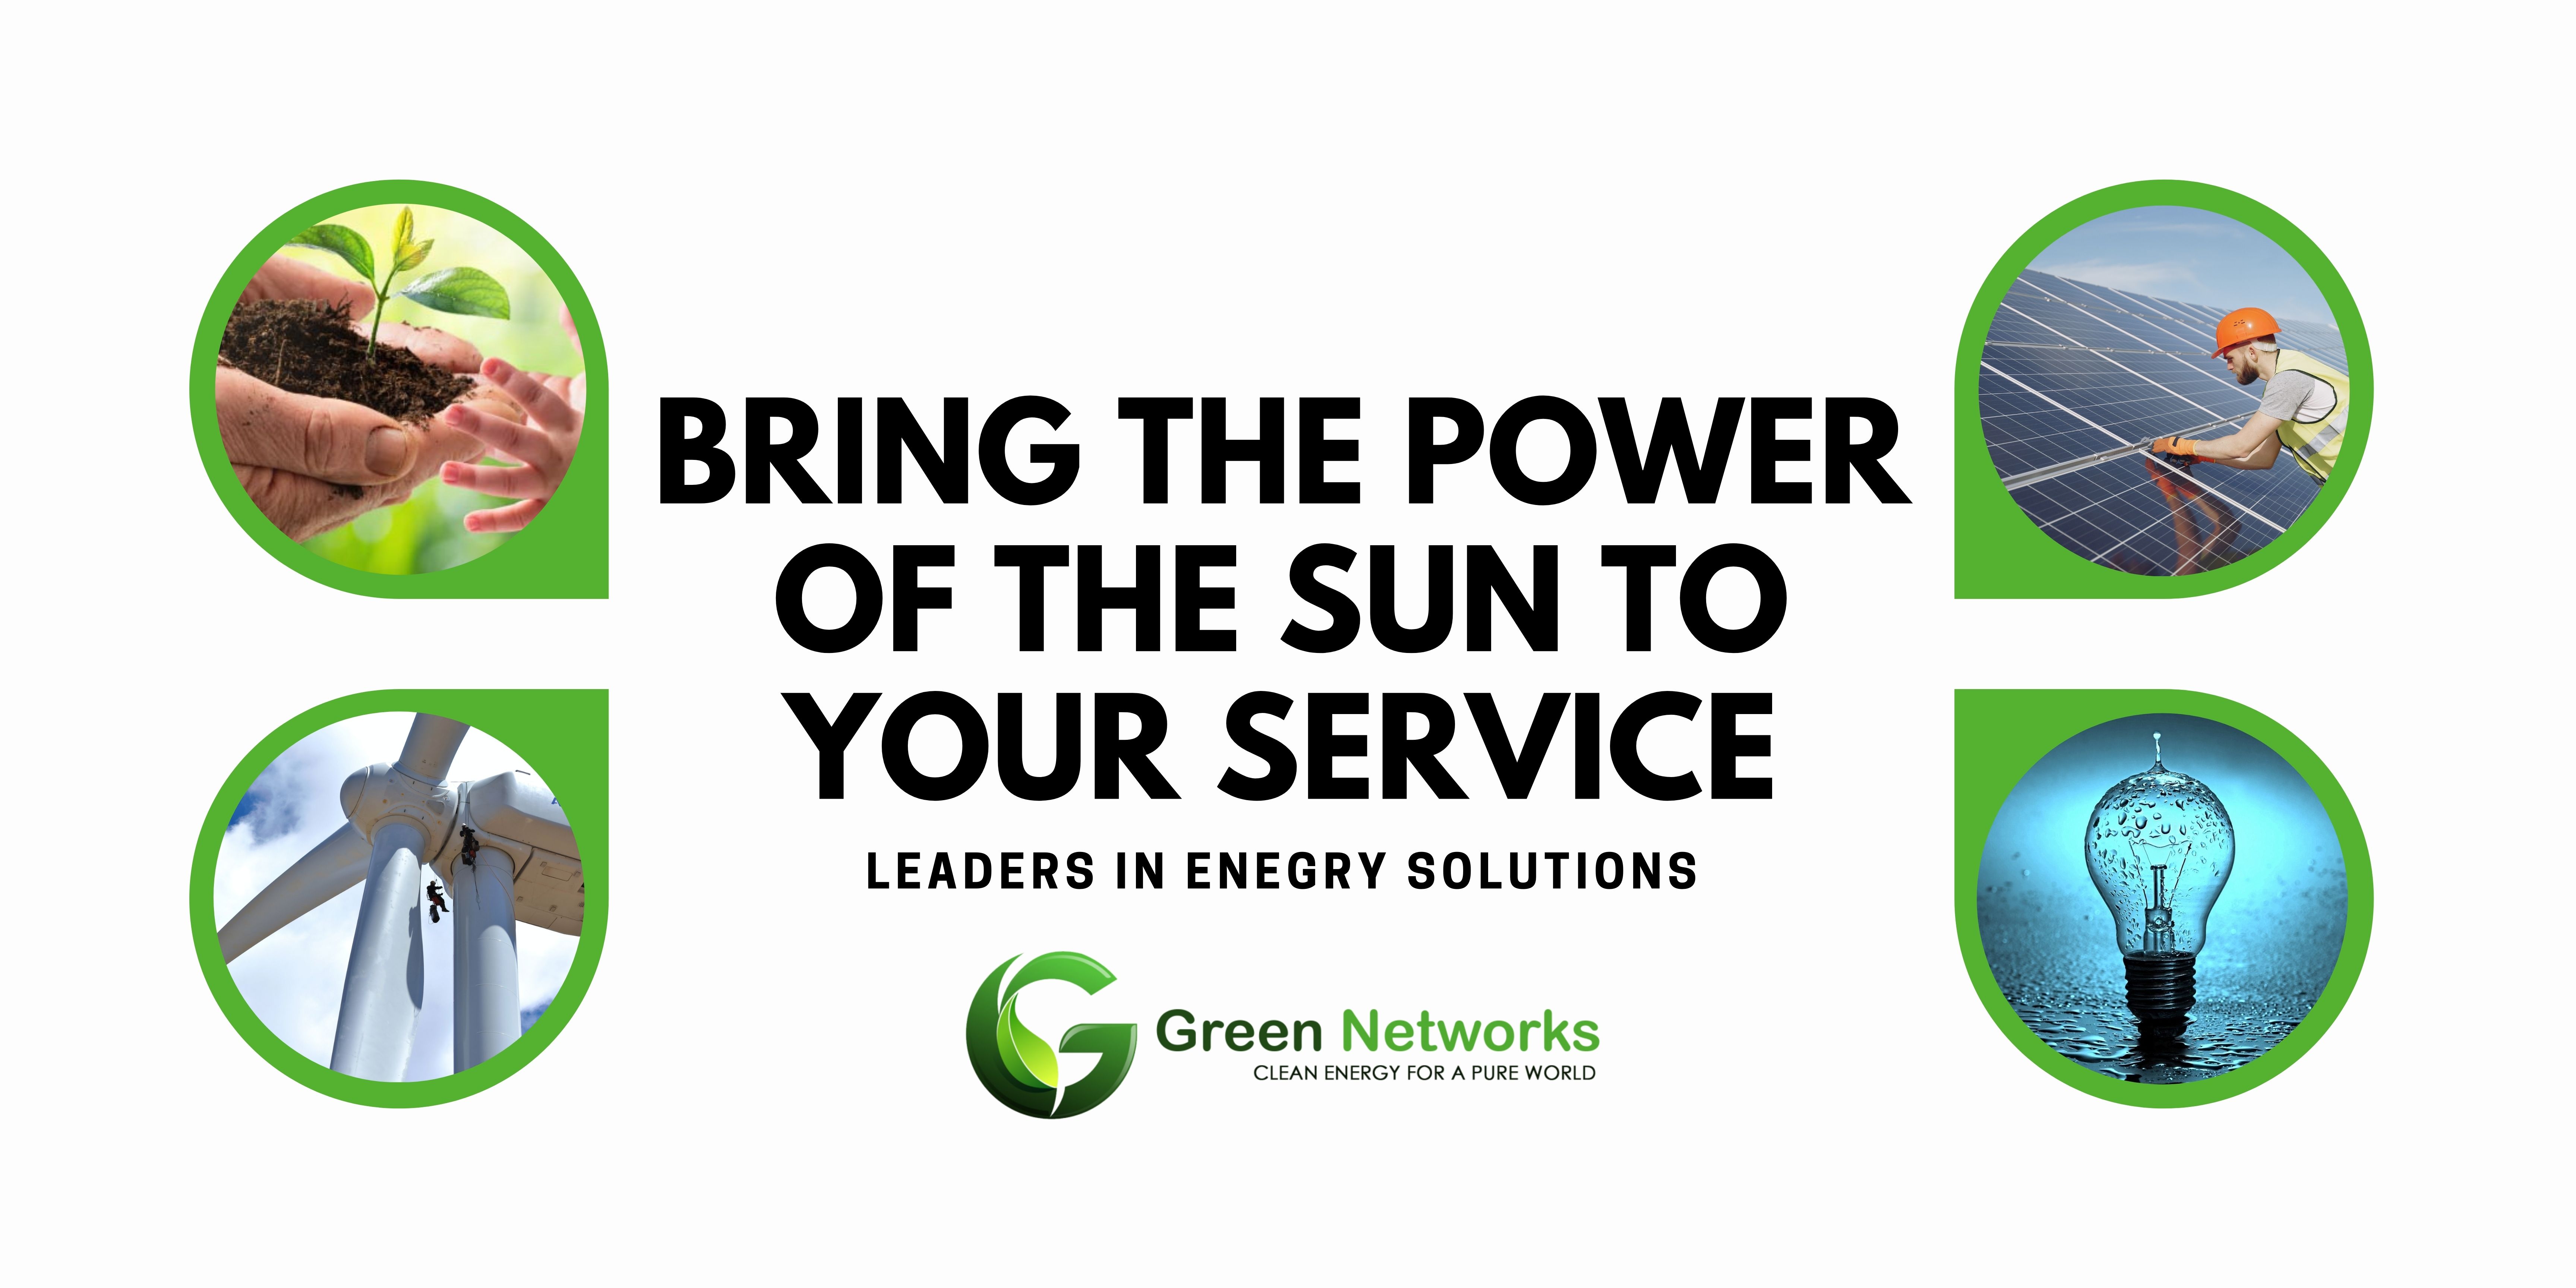 Bring the power of the sun to your service